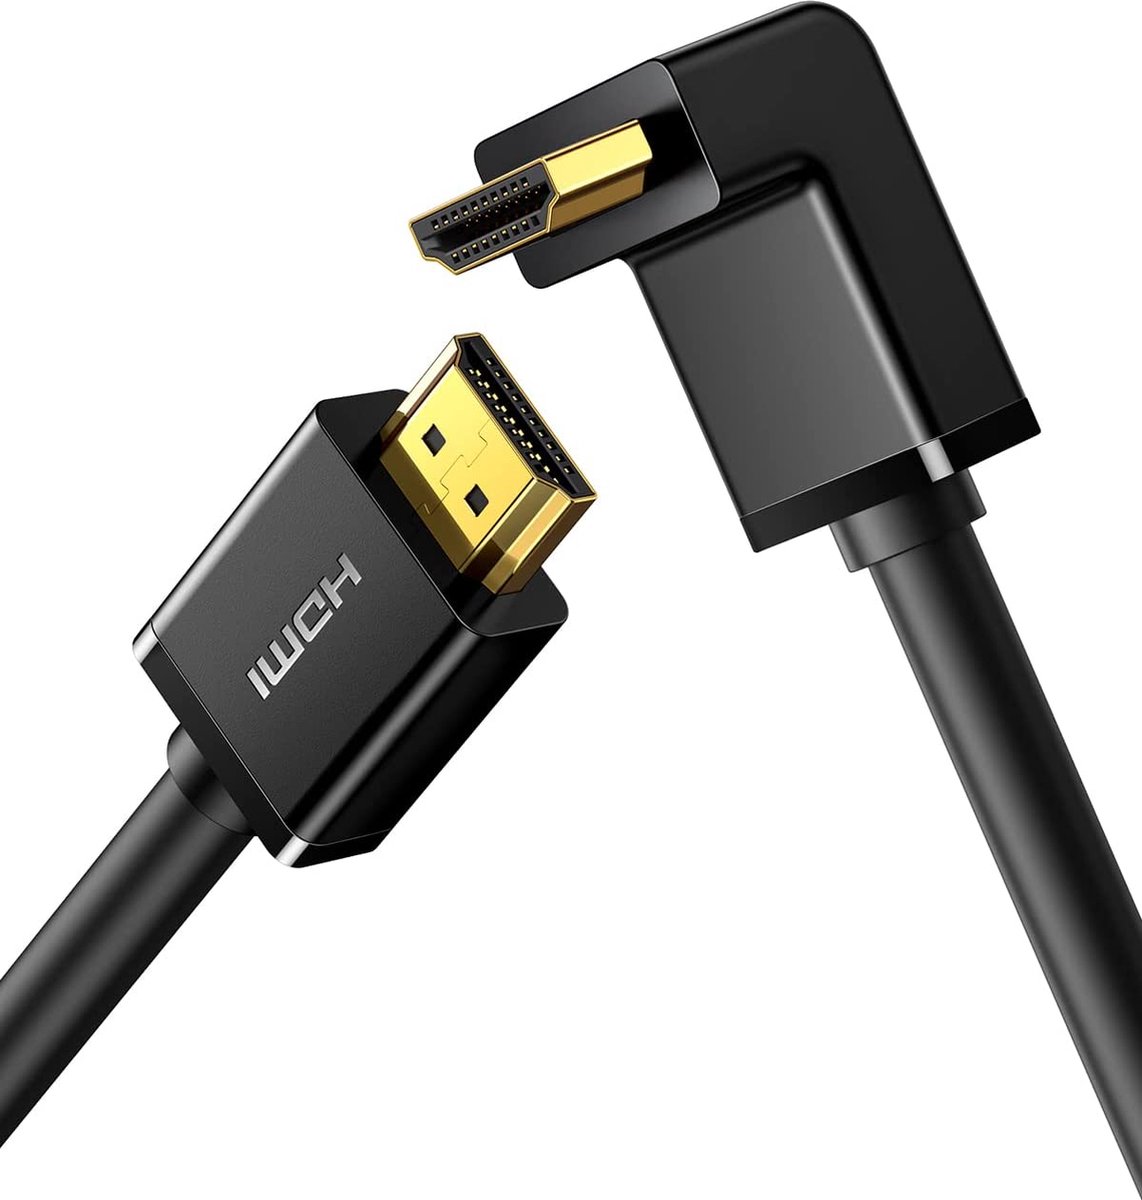 CoverMore HDMI Kabel - Haakse Ontwerp - 1.5 Meter - 4K Ultra HD - eARC - High-Speed HDMI - Geschikt voor Sony PS5, PS4, Xbox Series X, Blu-Ray, HDTV, Oled TV, Samsung, Philips